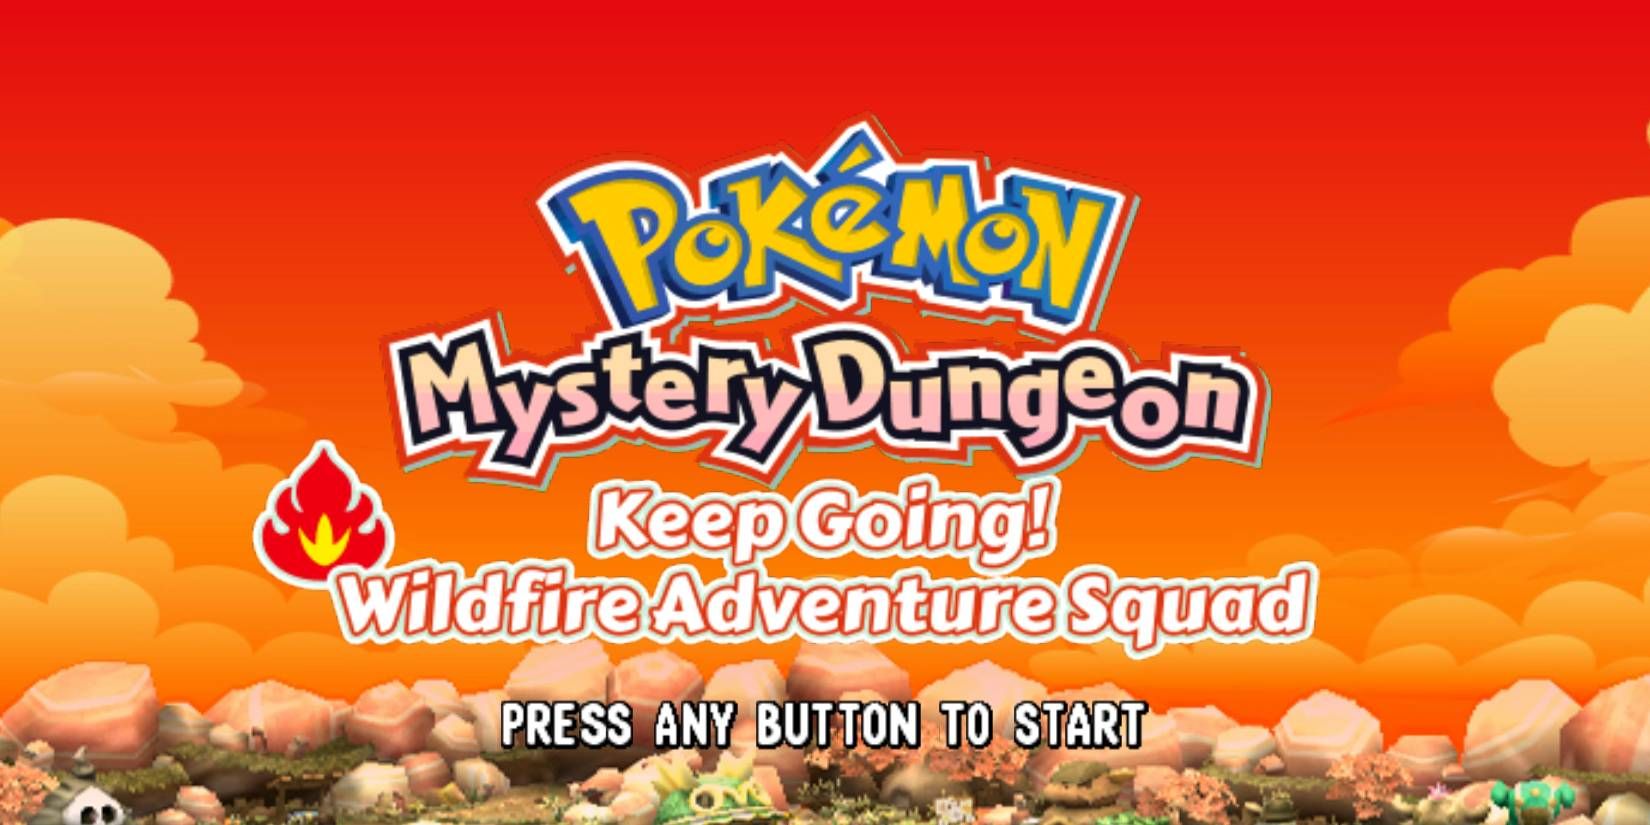 Pokemon Mystery Dungeon Wildfire Adventure Squad Wii Main Screen